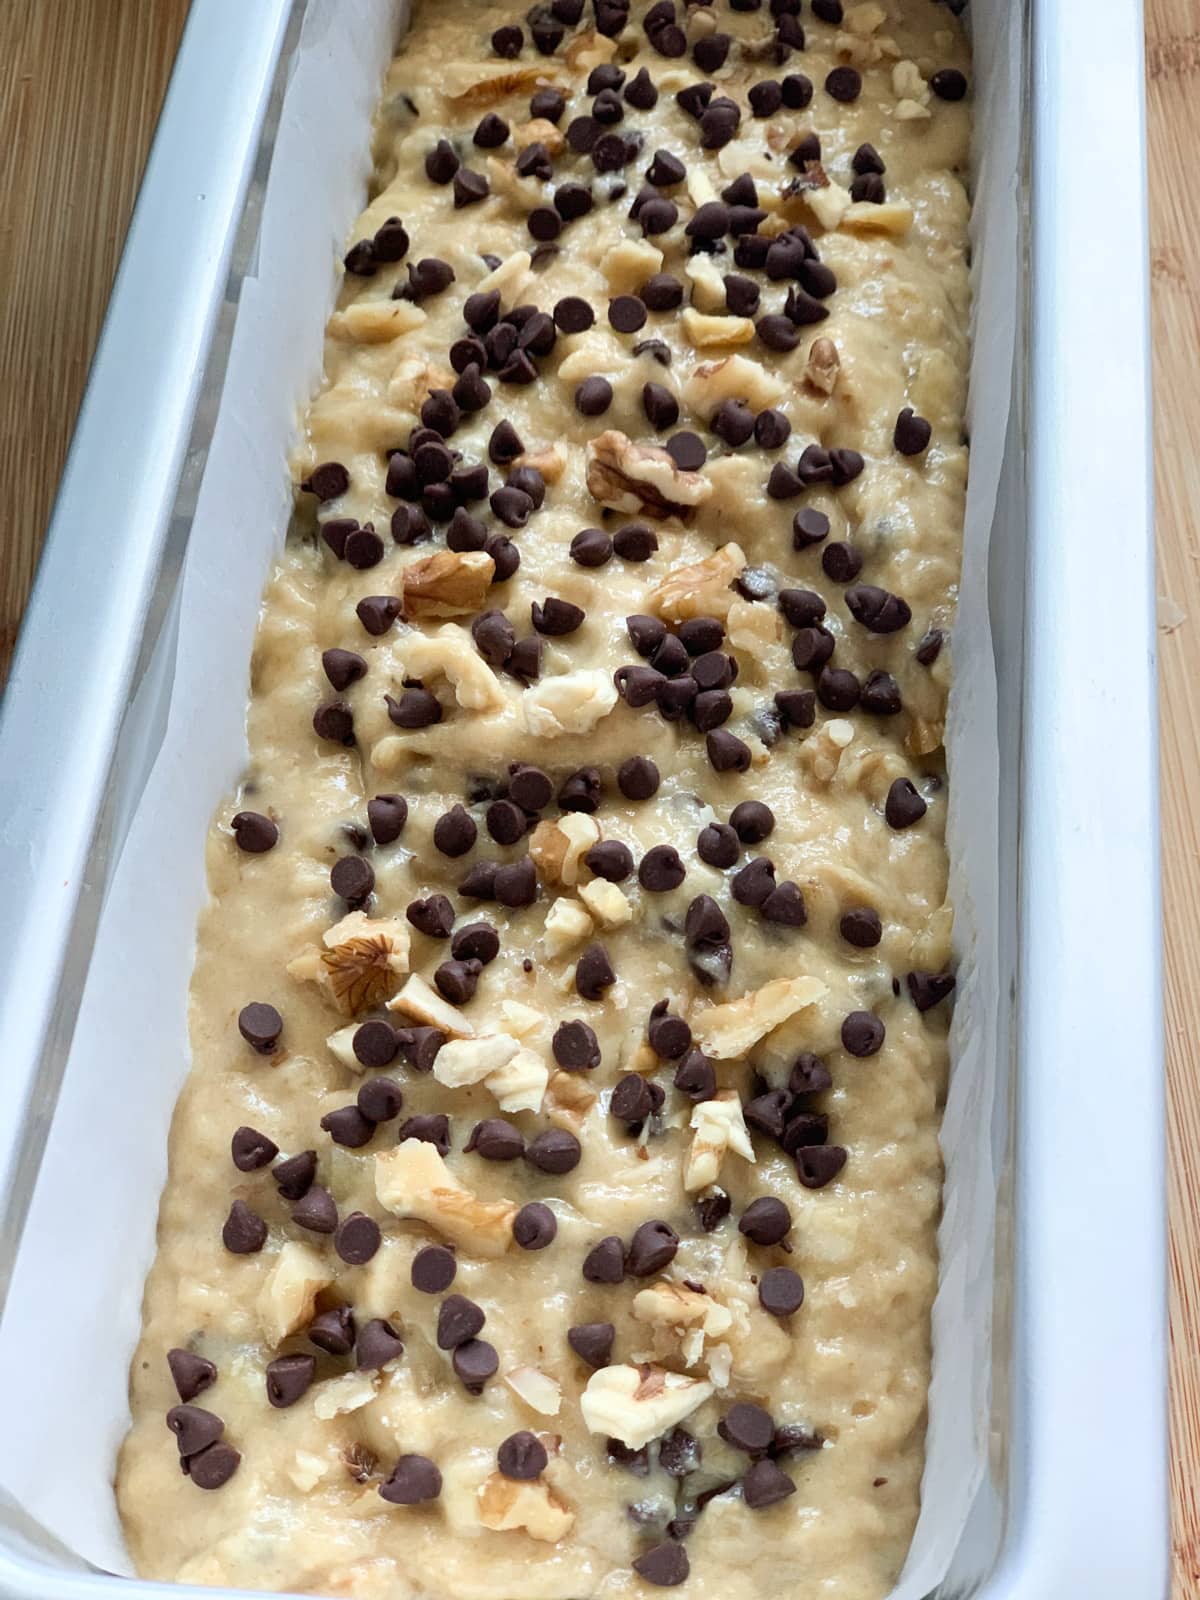 Batter in a bread baking pan, topped with chopped walnuts and chocolate chips 